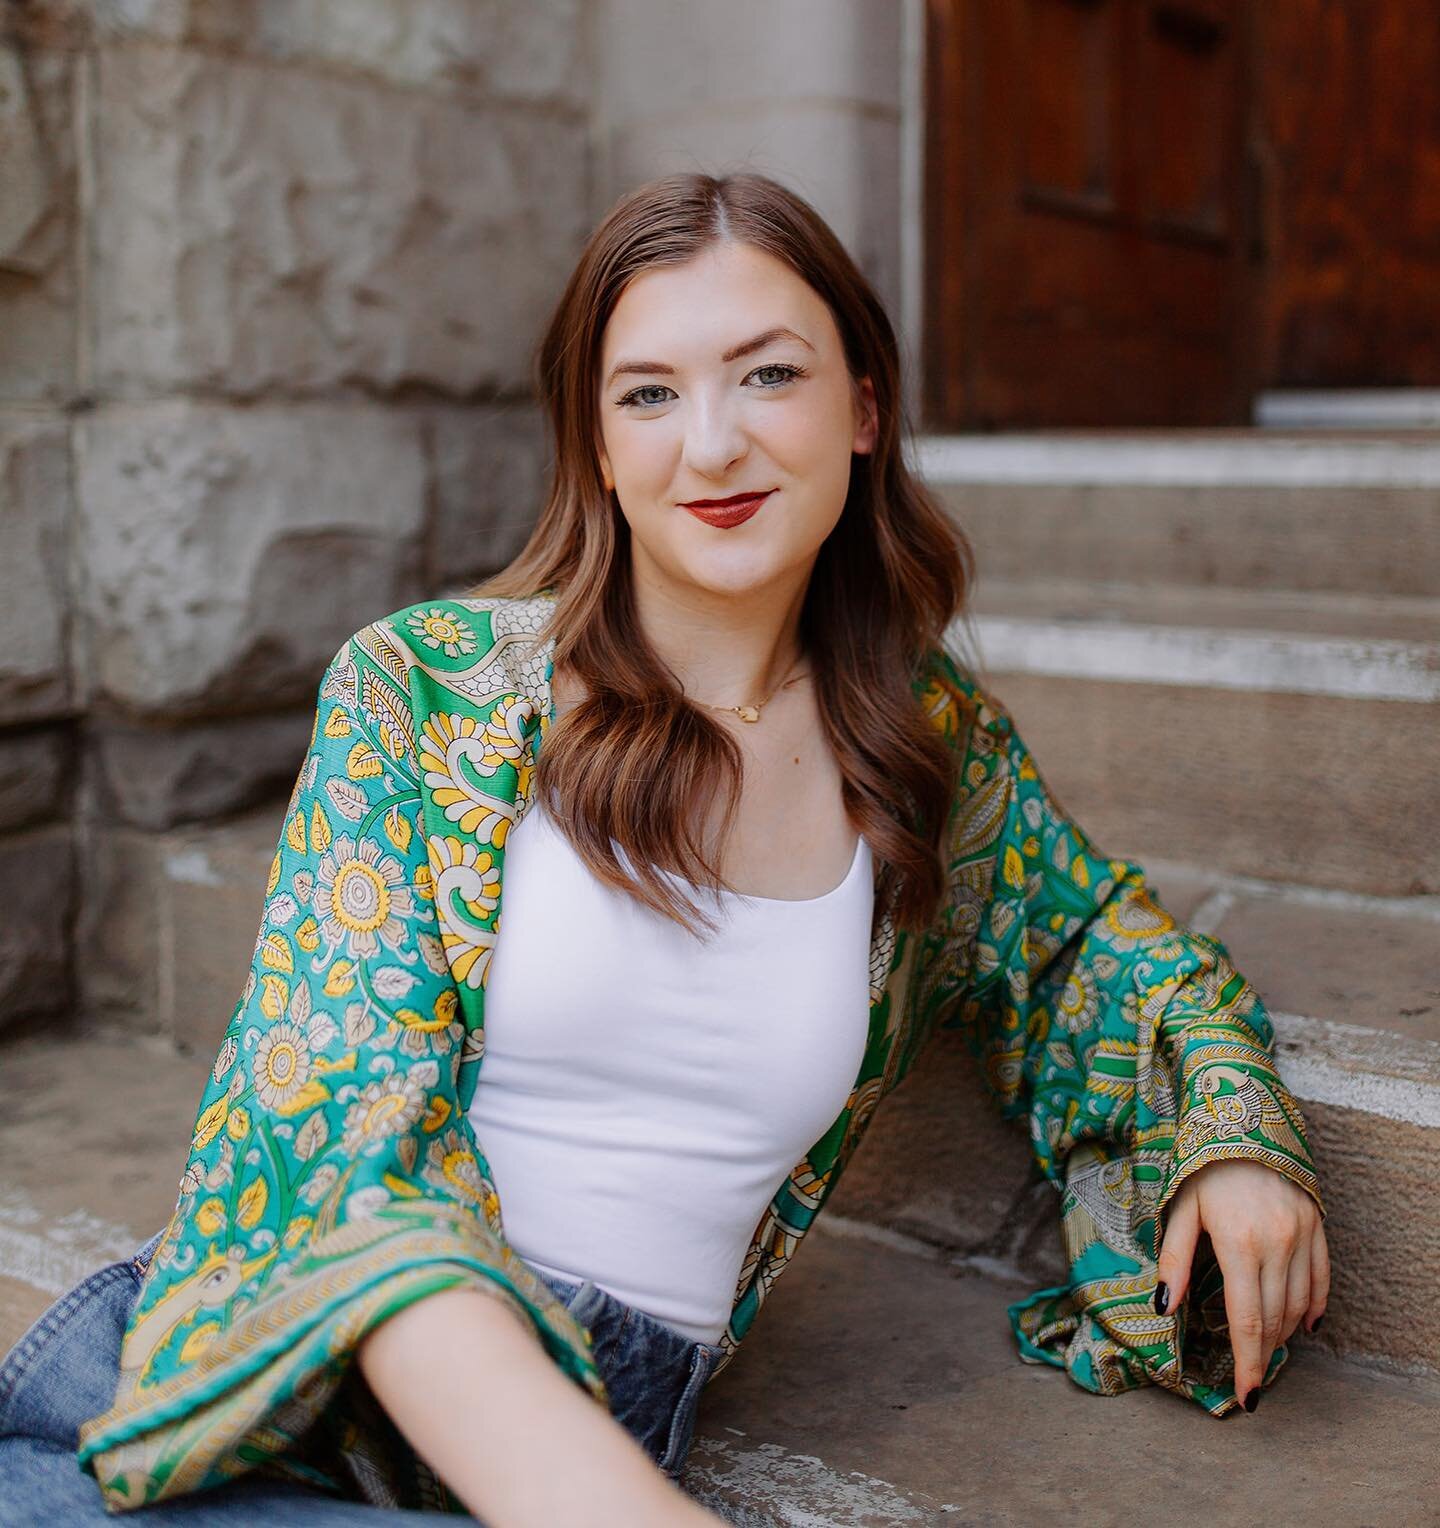 These downtown sessions are so much fun. Addison&rsquo;s personality shined so bright at this amazing location ✨  Happy Friday everyone!
.
.
.
.
.
.
.
.

#parkerphotographer  #coloradophotographer #coloradoportraitphotographer #denverseniorphotograph